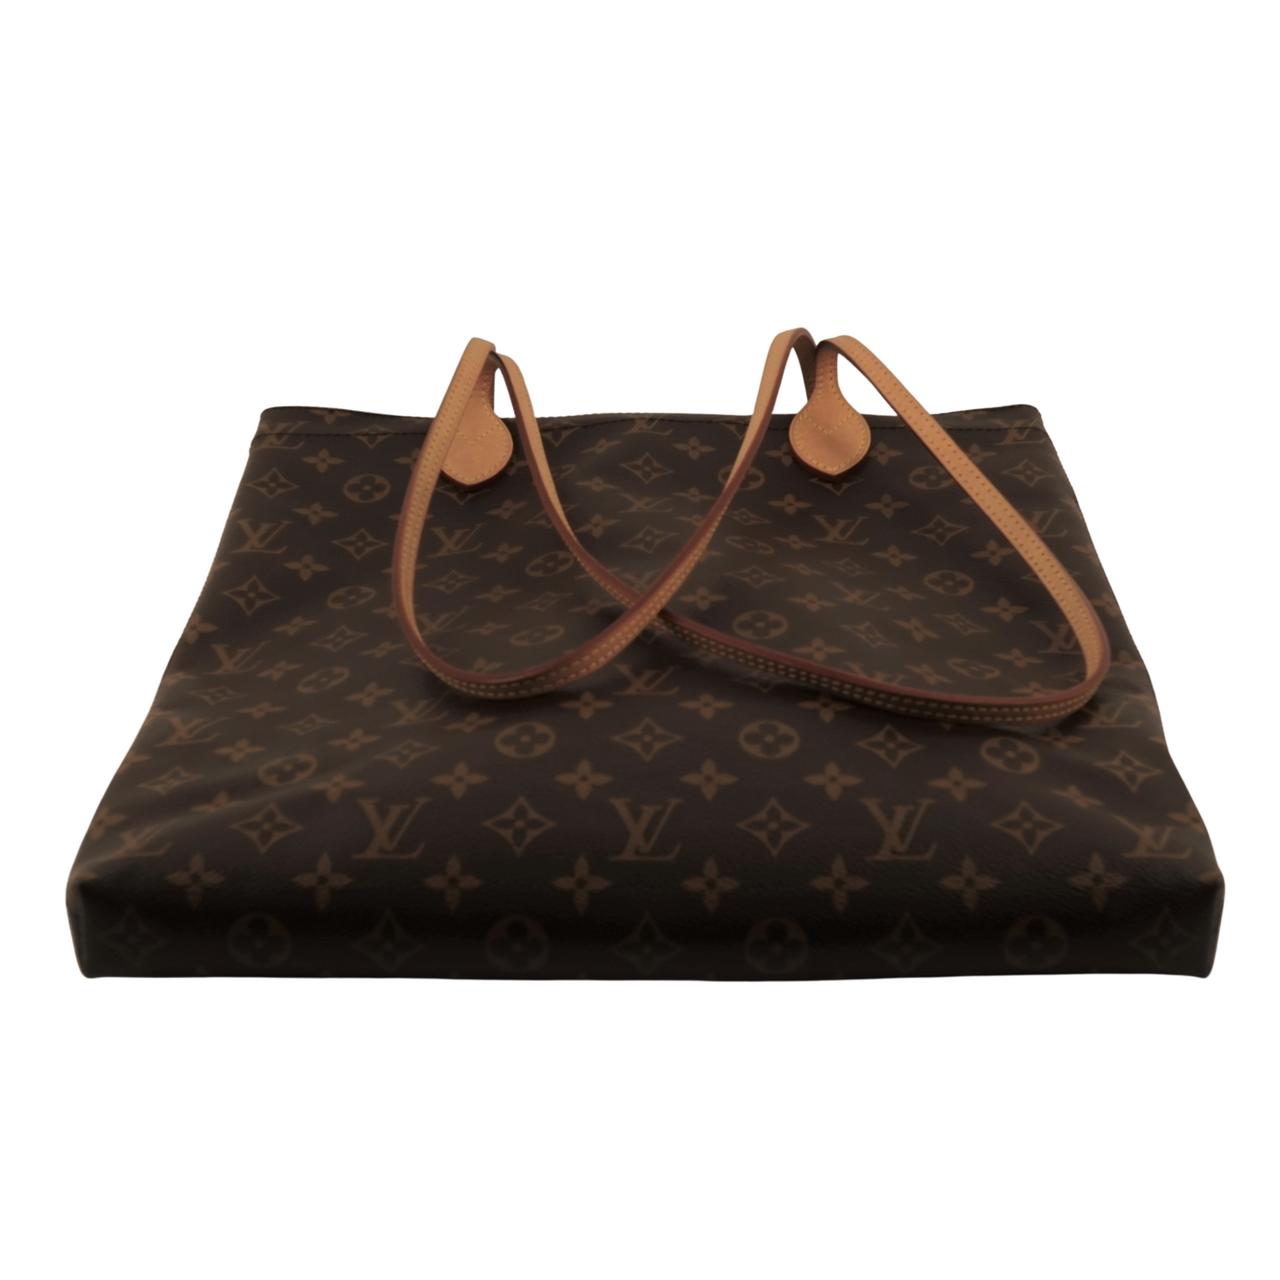 Louis Vuitton Carry It w/ Dust Bag in Excellent Condition! - Free  Shipping USA - The Happy Coin